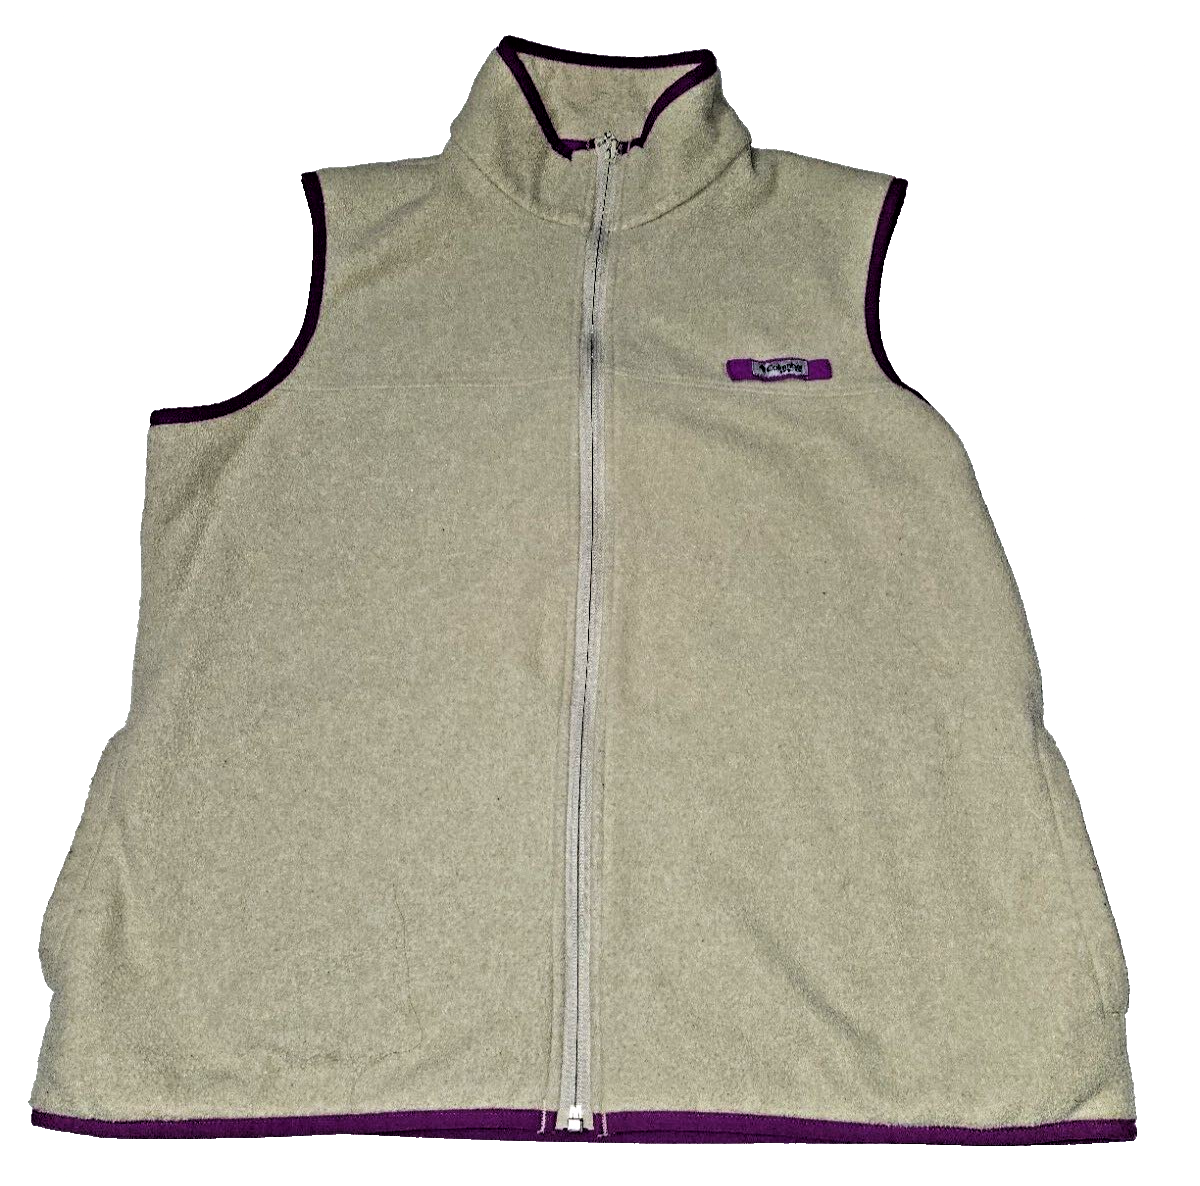 Primary image for Columbia Womens Vest Size XL beige purple Full Zip Sleeveless Pocket Collared